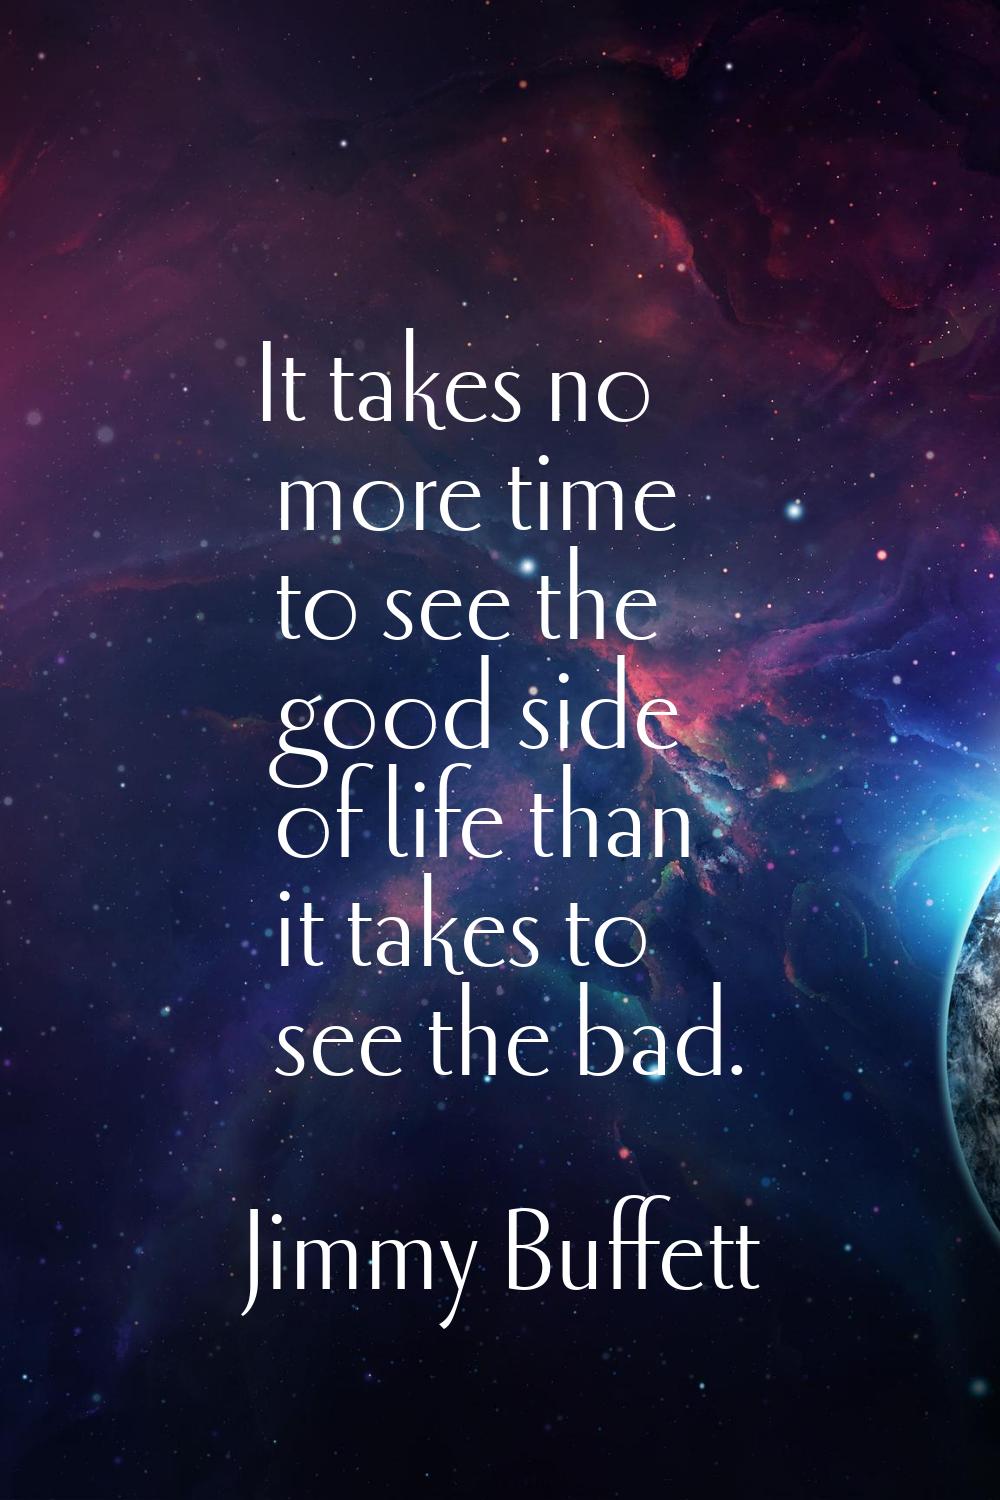 It takes no more time to see the good side of life than it takes to see the bad.